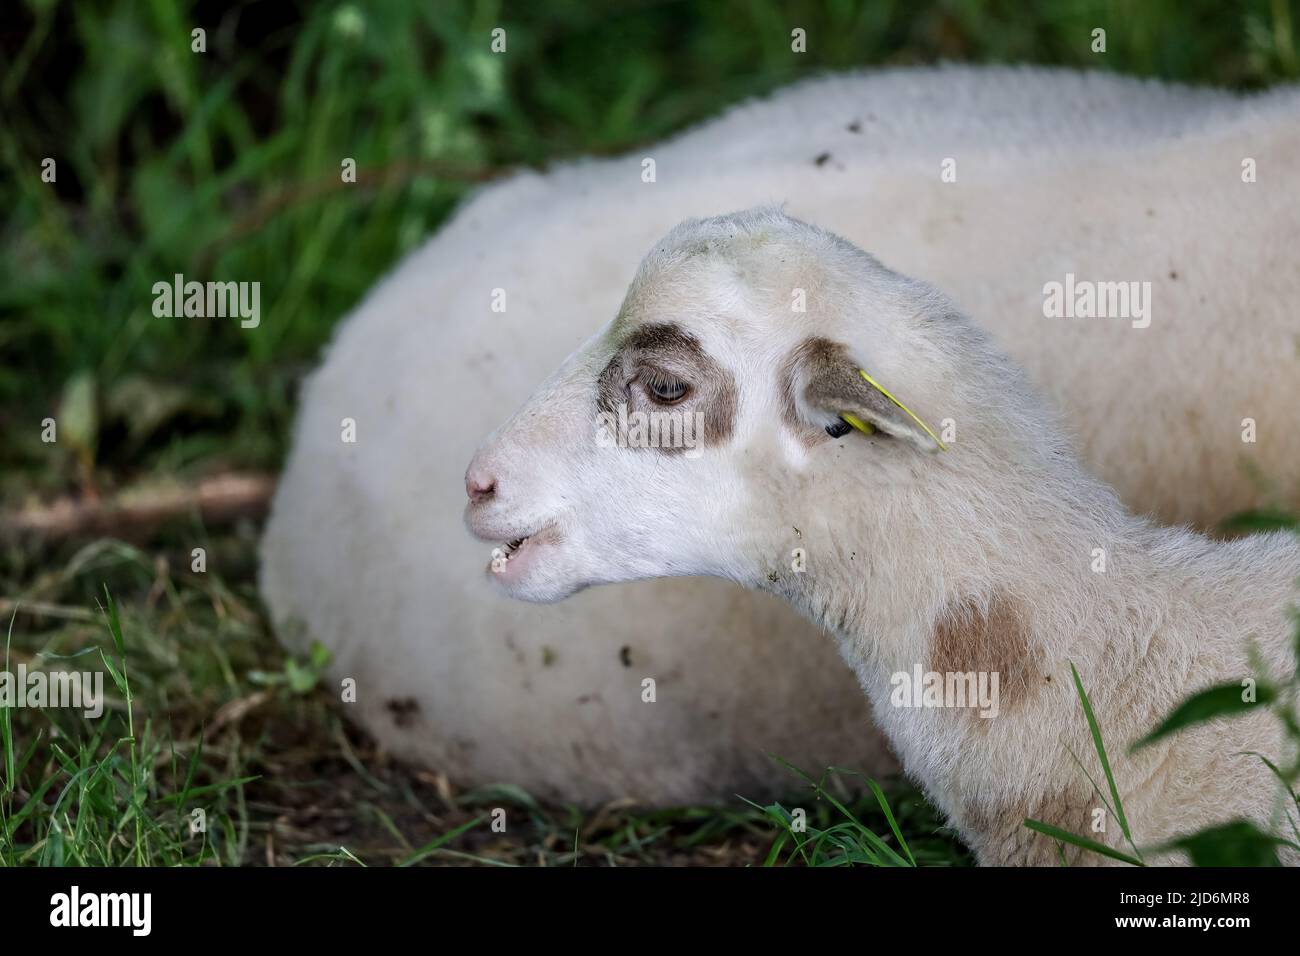 Young sheep with its colorful wool feeds with grass in Eco pasture Stock Photo